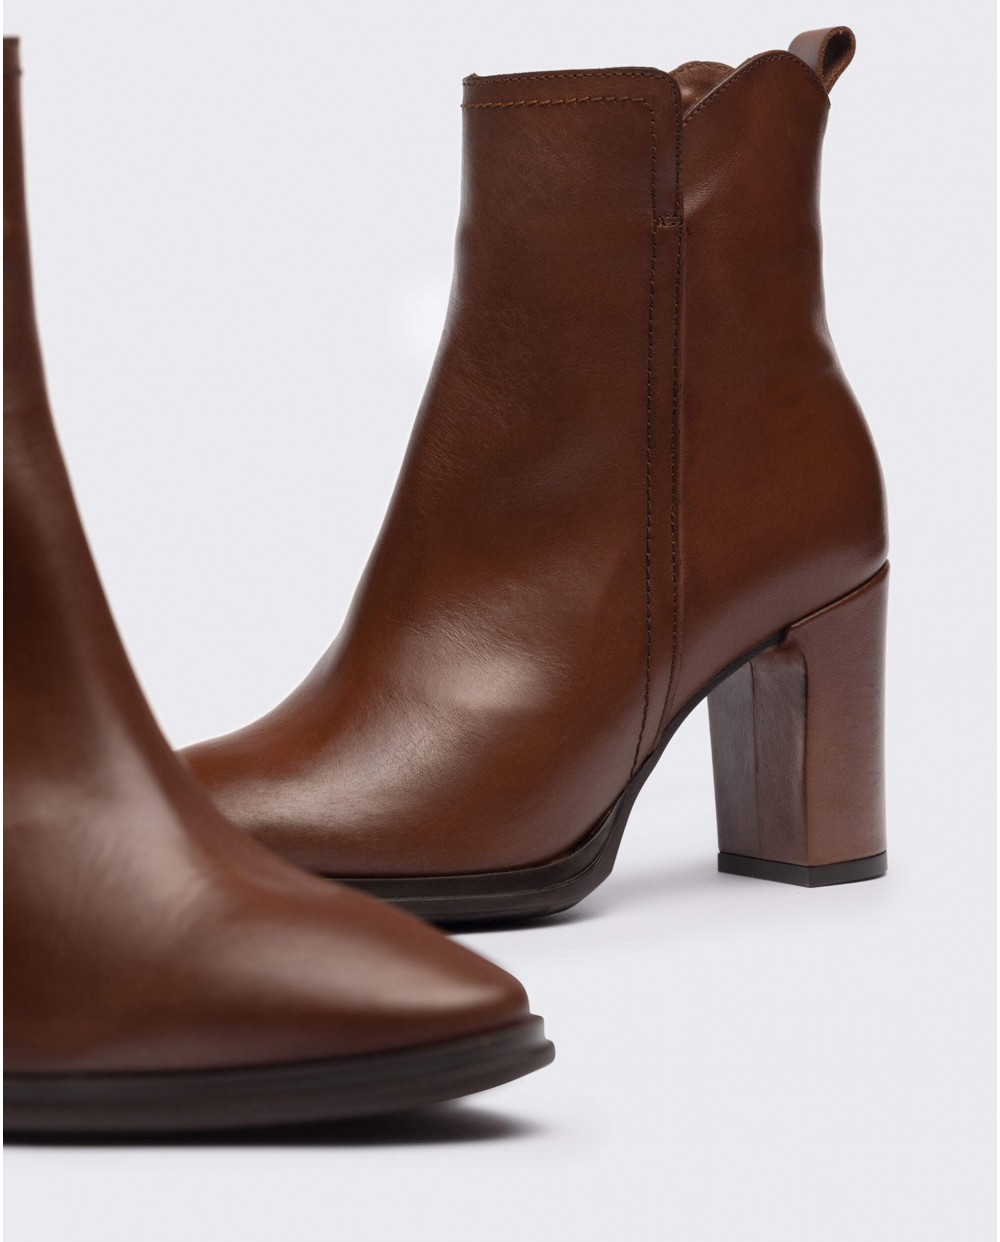 Wonders-Ankle Boots-Brown Galera Ankle Boot